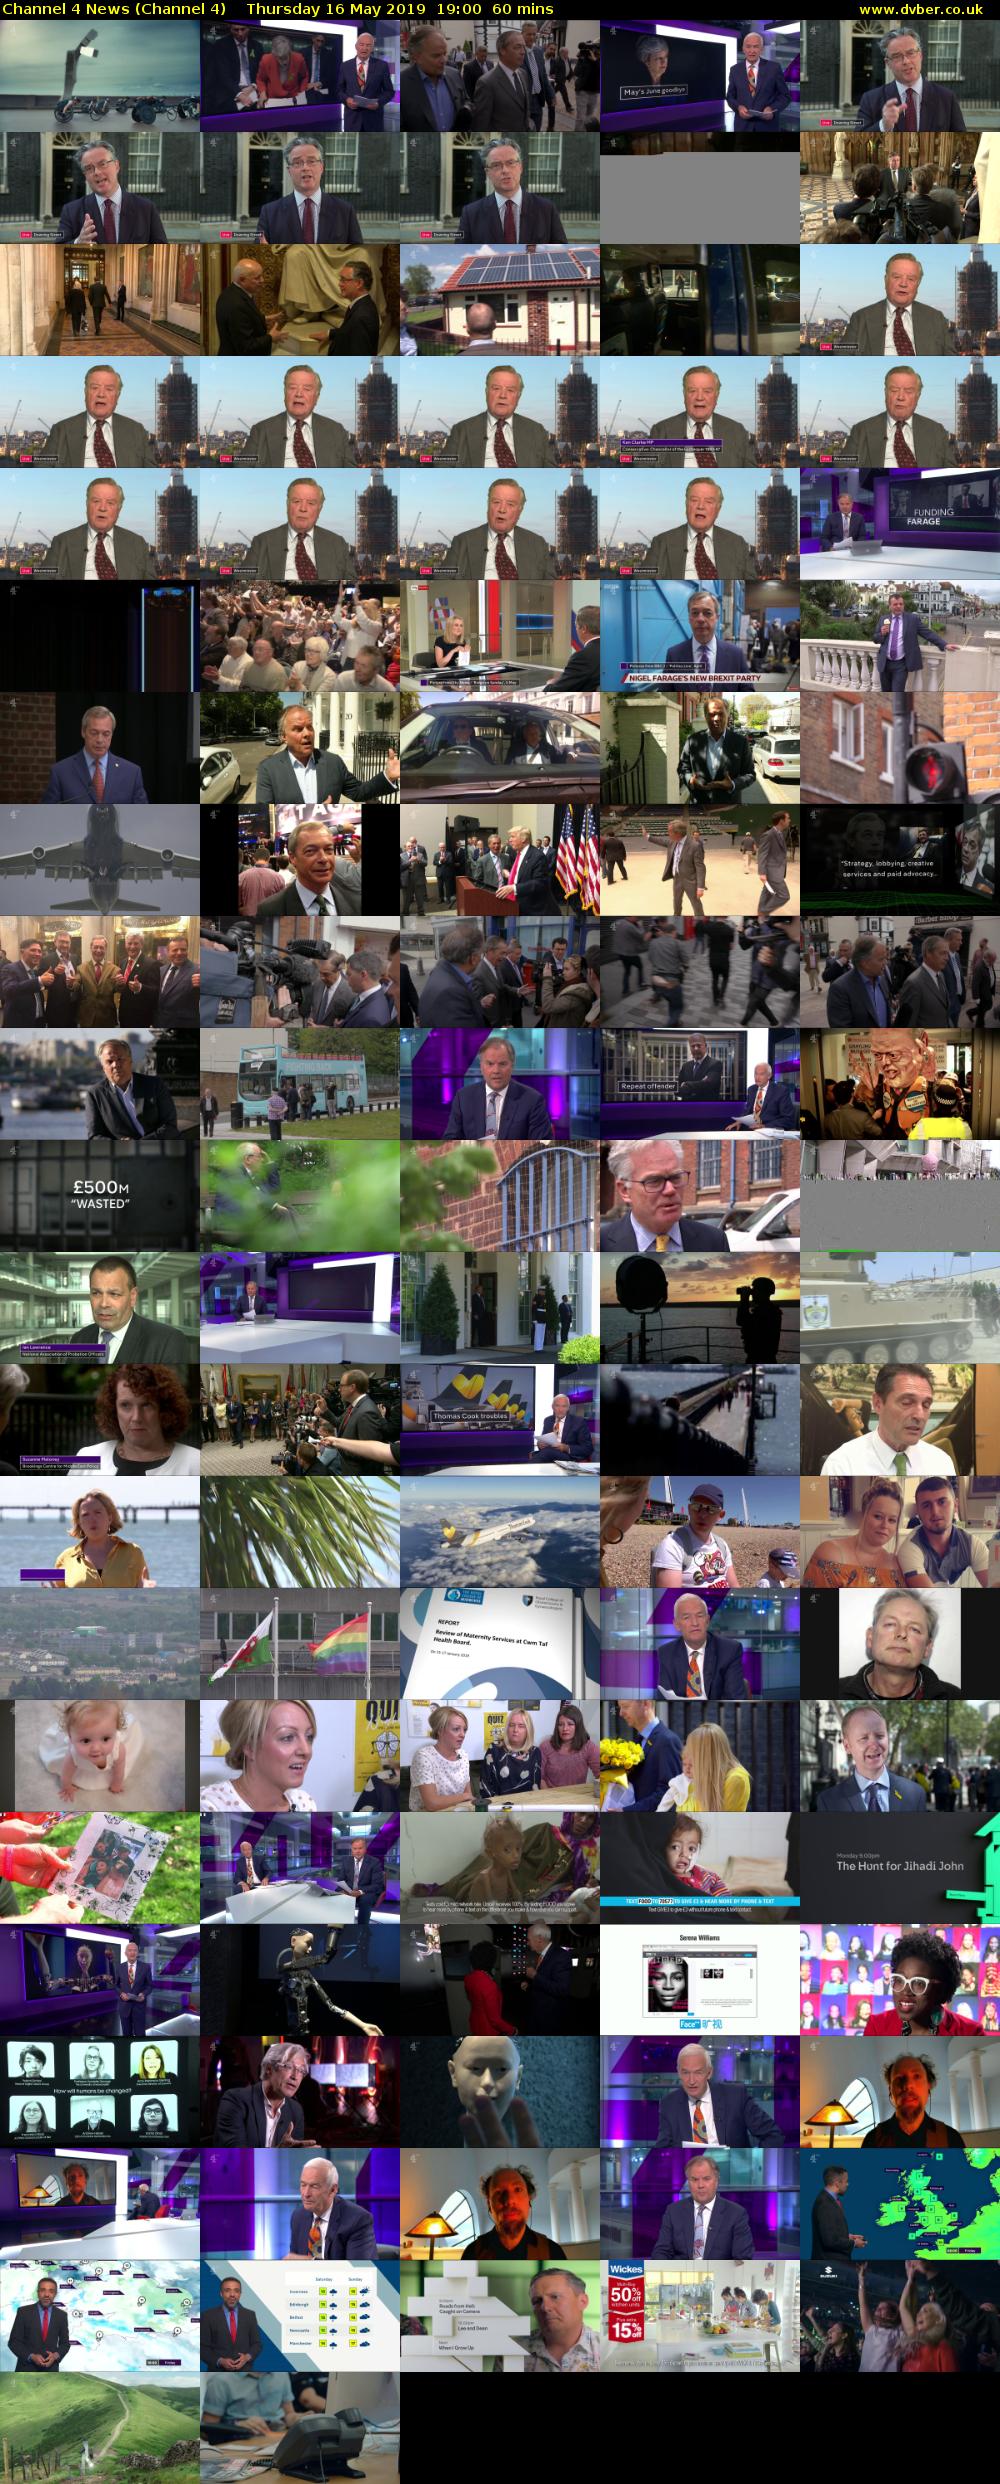 Channel 4 News (Channel 4) Thursday 16 May 2019 19:00 - 20:00